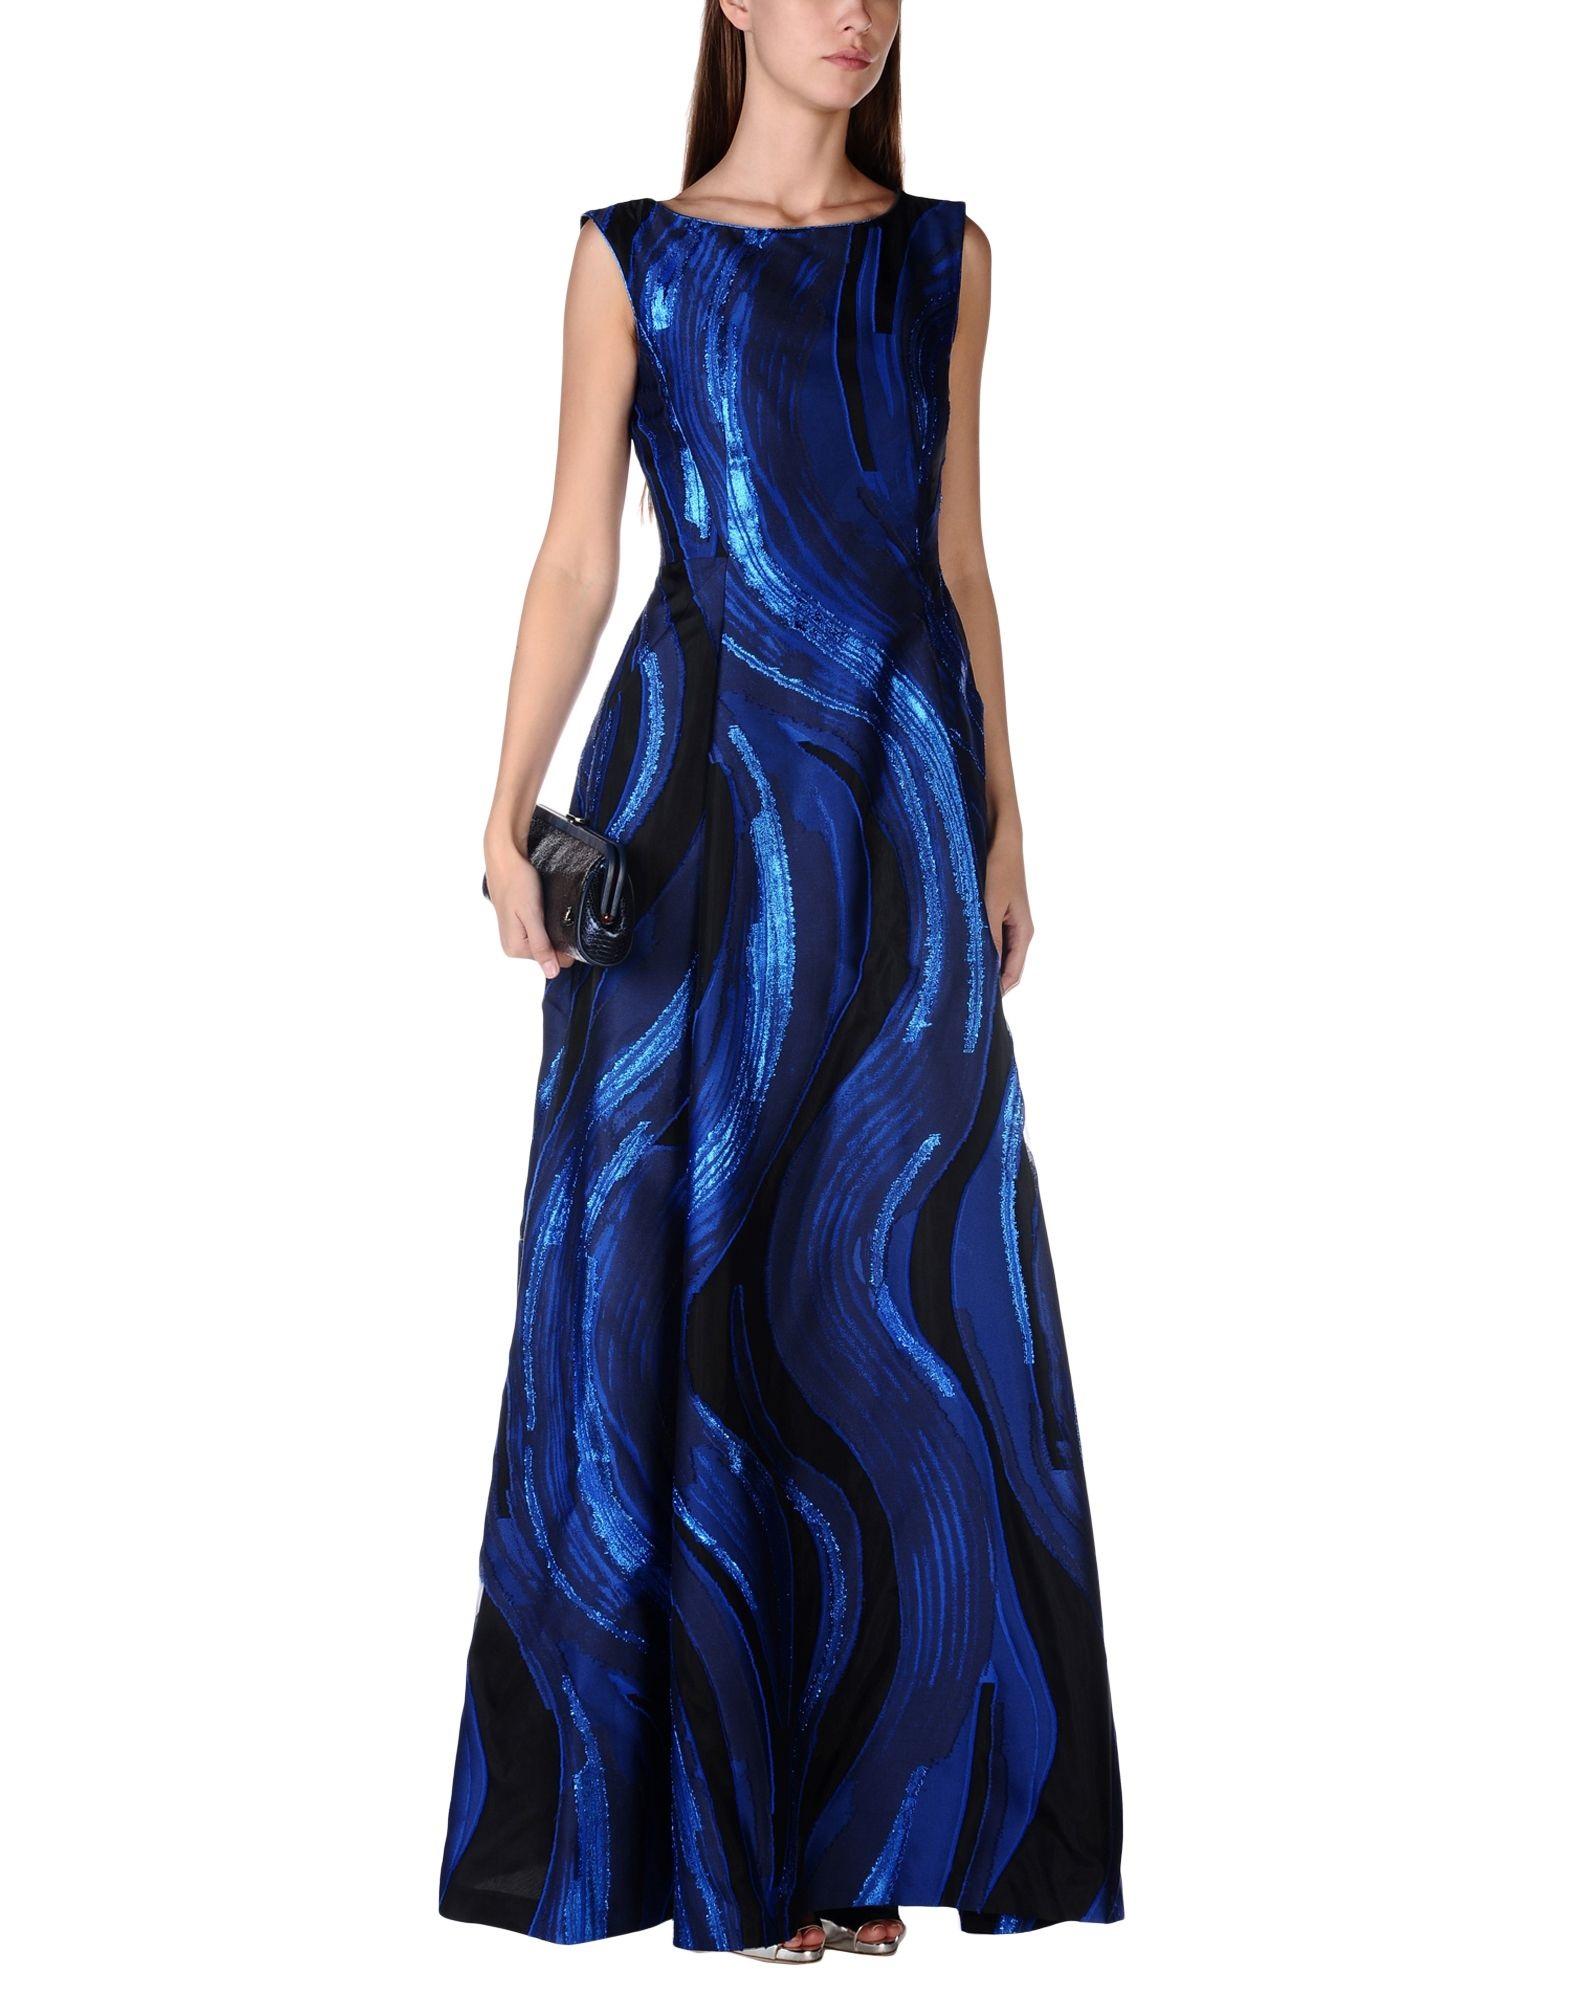 New Alberta Ferretti Jacquard Flared Long Dress Gown
Designer size 40 - US 4
Black and Blue with Metallic Threads, Jacquard, Pleated, Two Side Deep Pockets, Fully Lined, Flared Hem, Back Zip Closure, Non-stretchy fabric.
Measurements: Length - 63